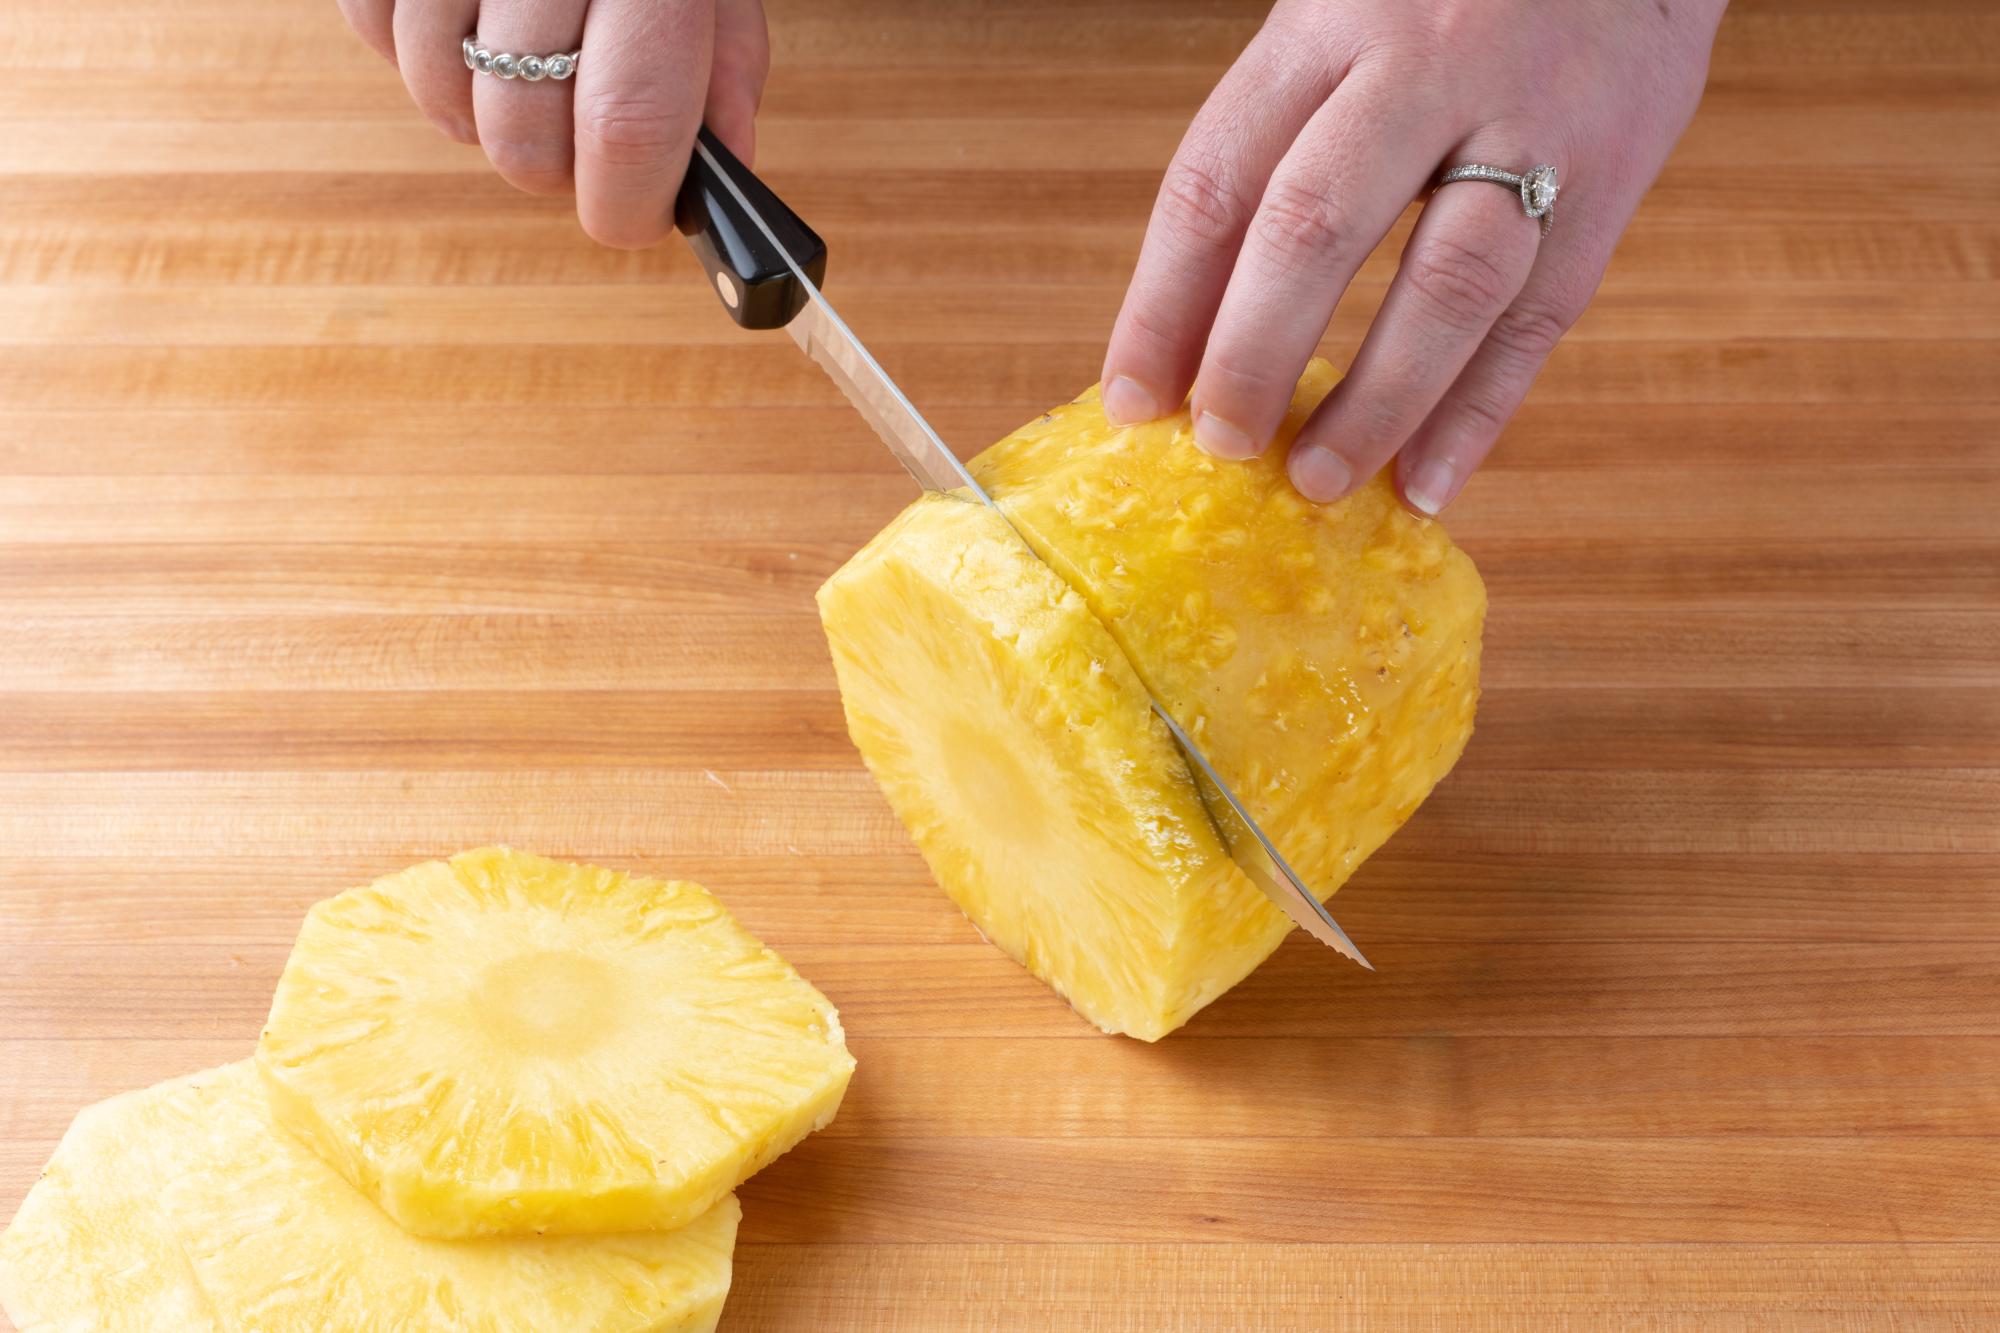 Slicing the pineapple with a Petite Carver.